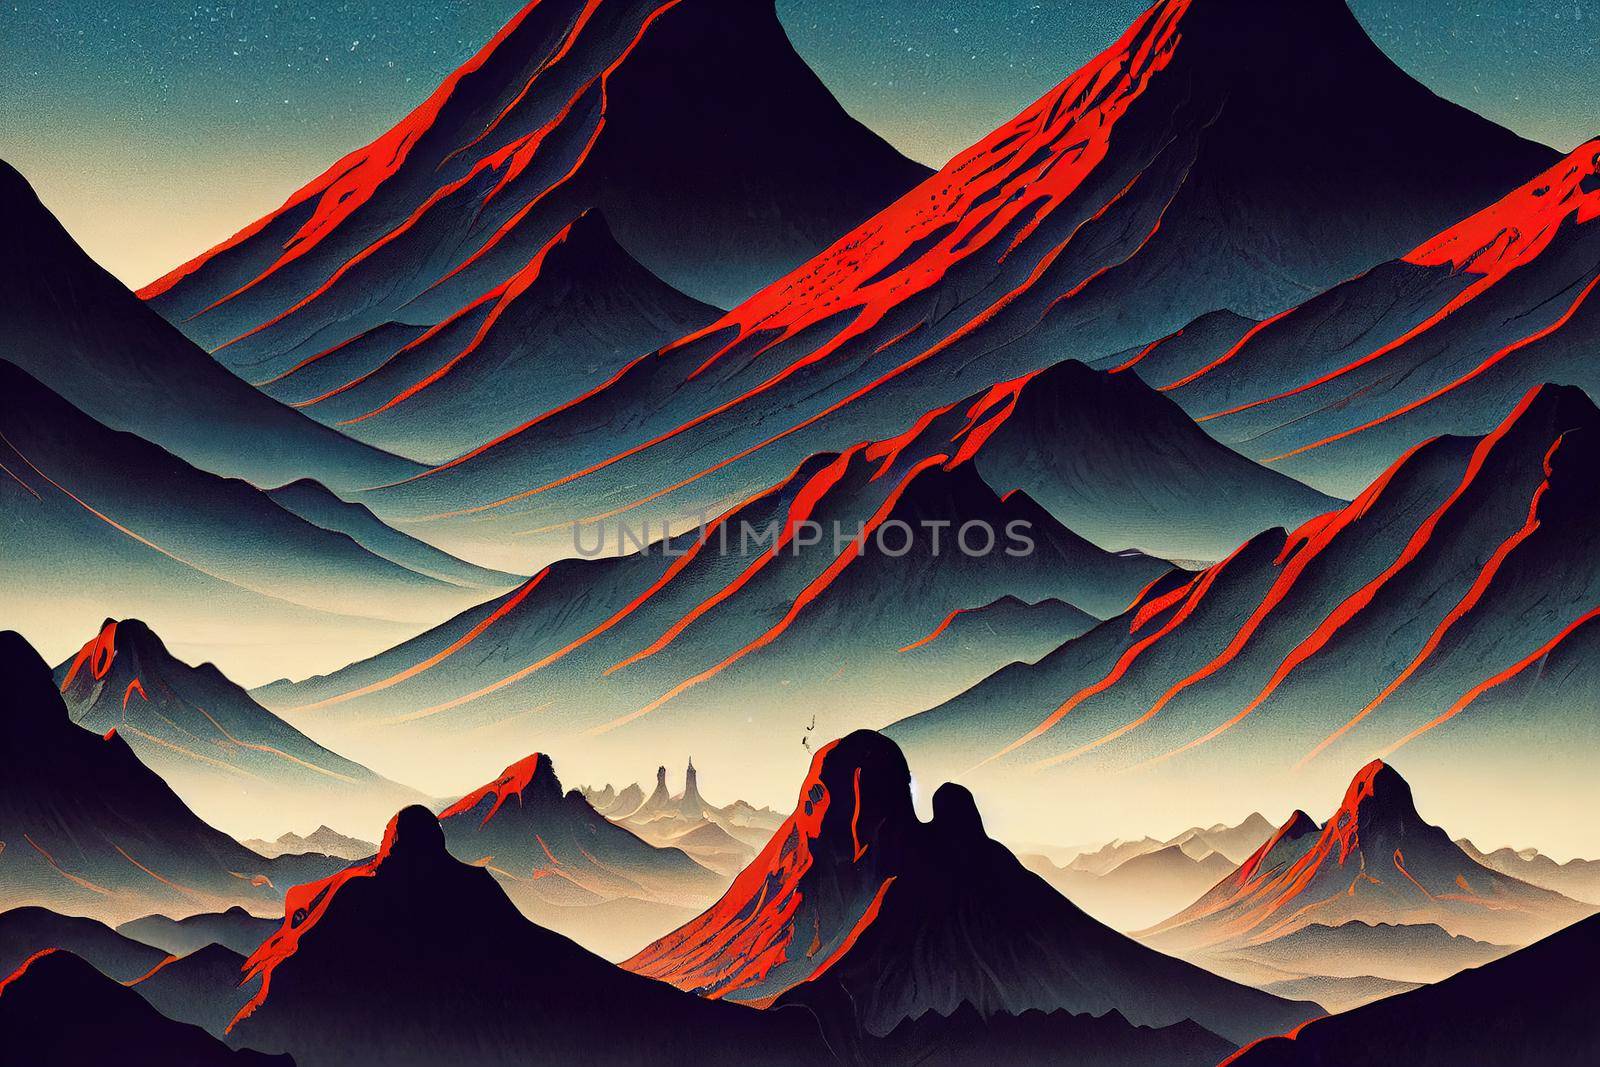 Toon style digital illustration of Mountains by 2ragon